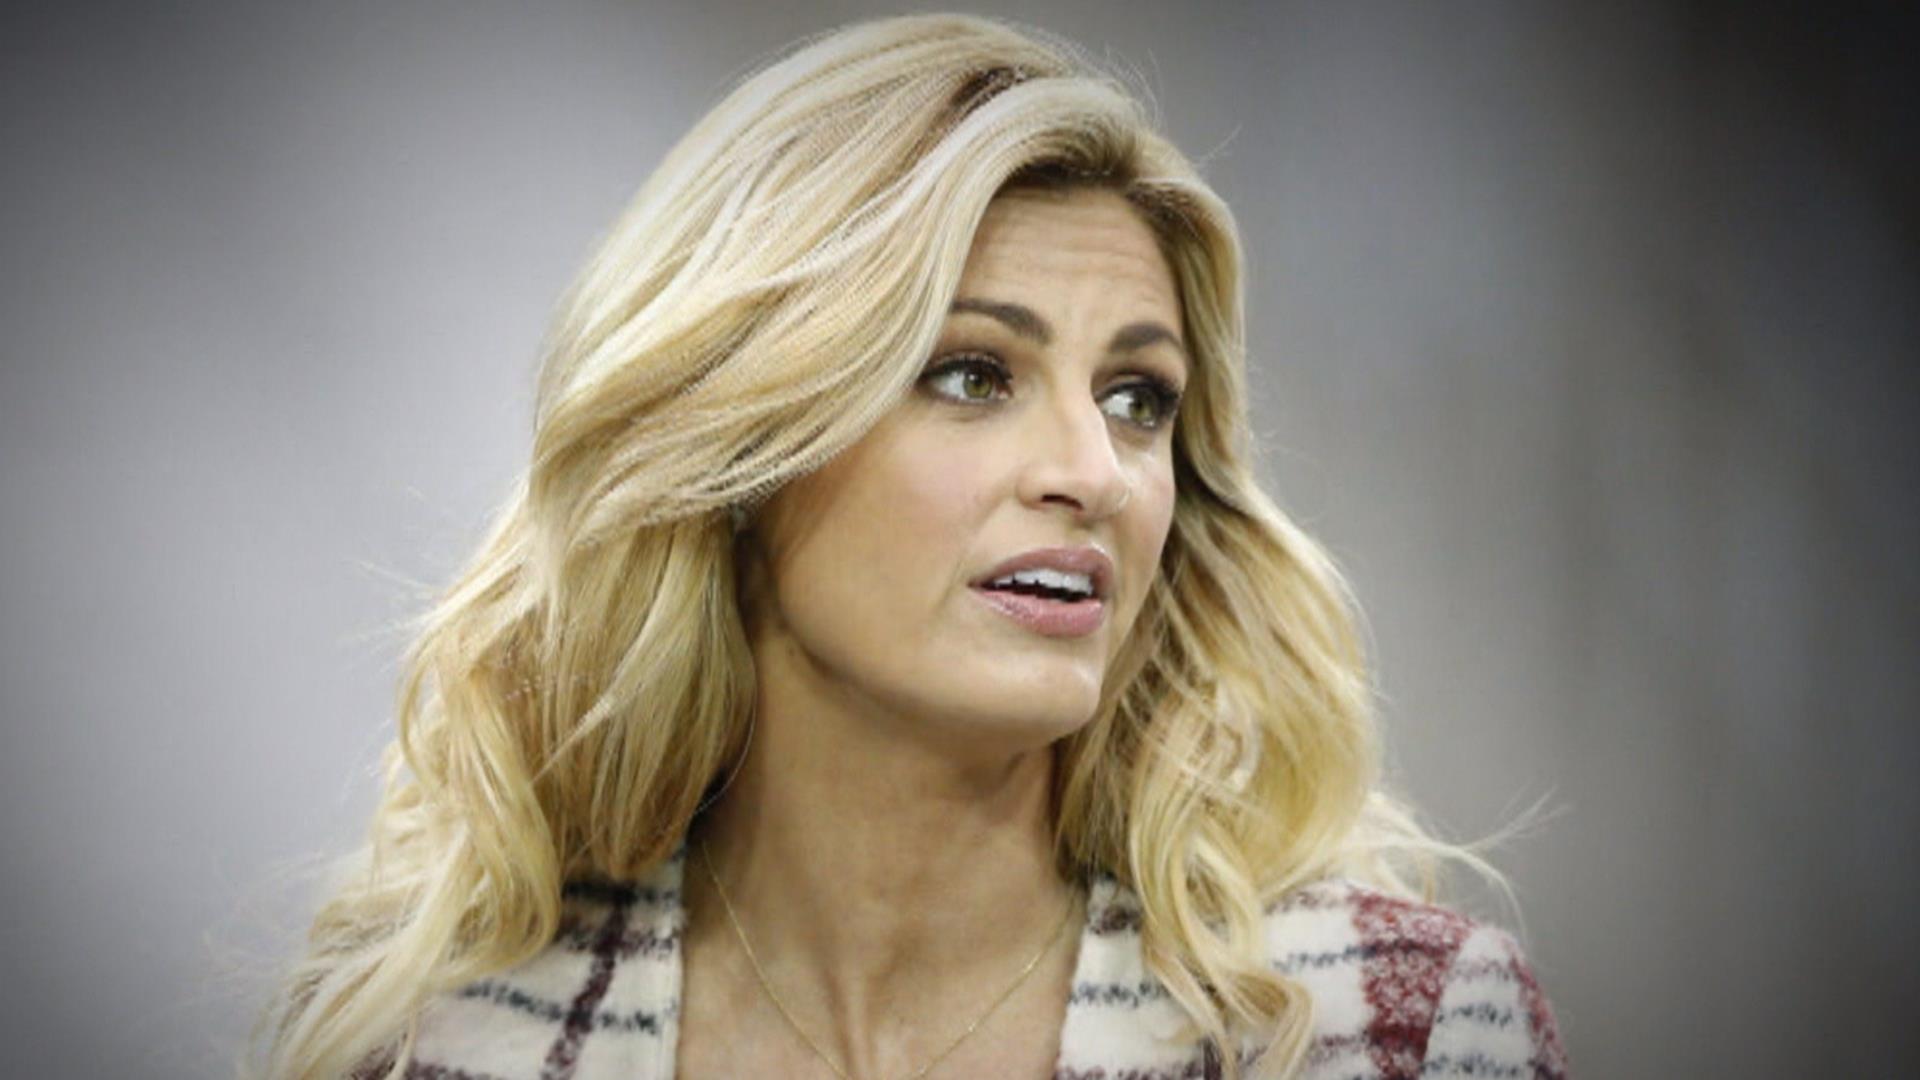 devika kaushal recommends erin andrews keyhole video pic